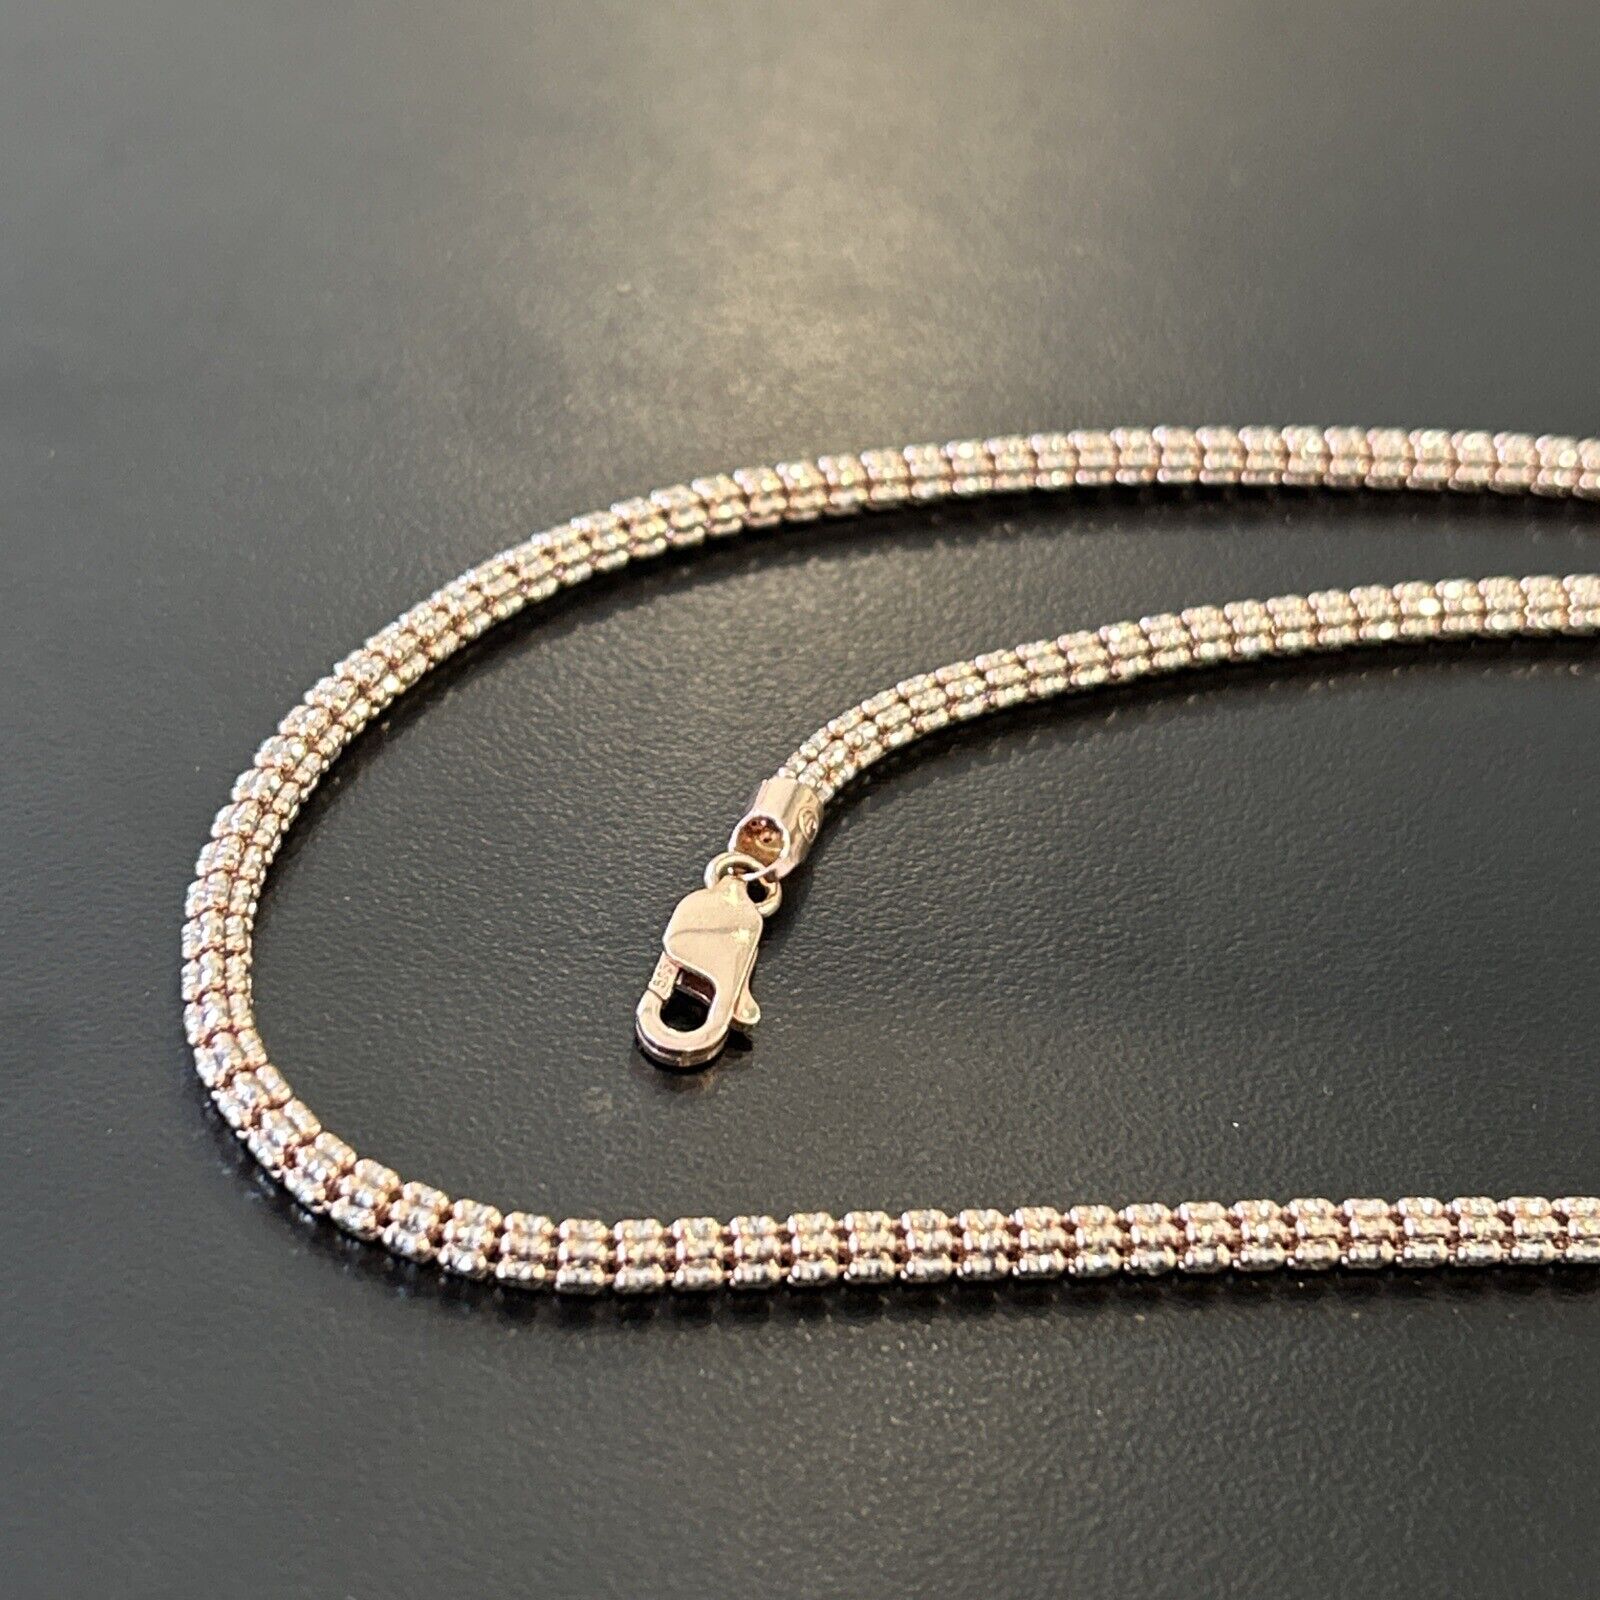 14k 585 Rose Gold Two Toned Ice Link Chain - 22 inches - 21.9grams - 3.8mm